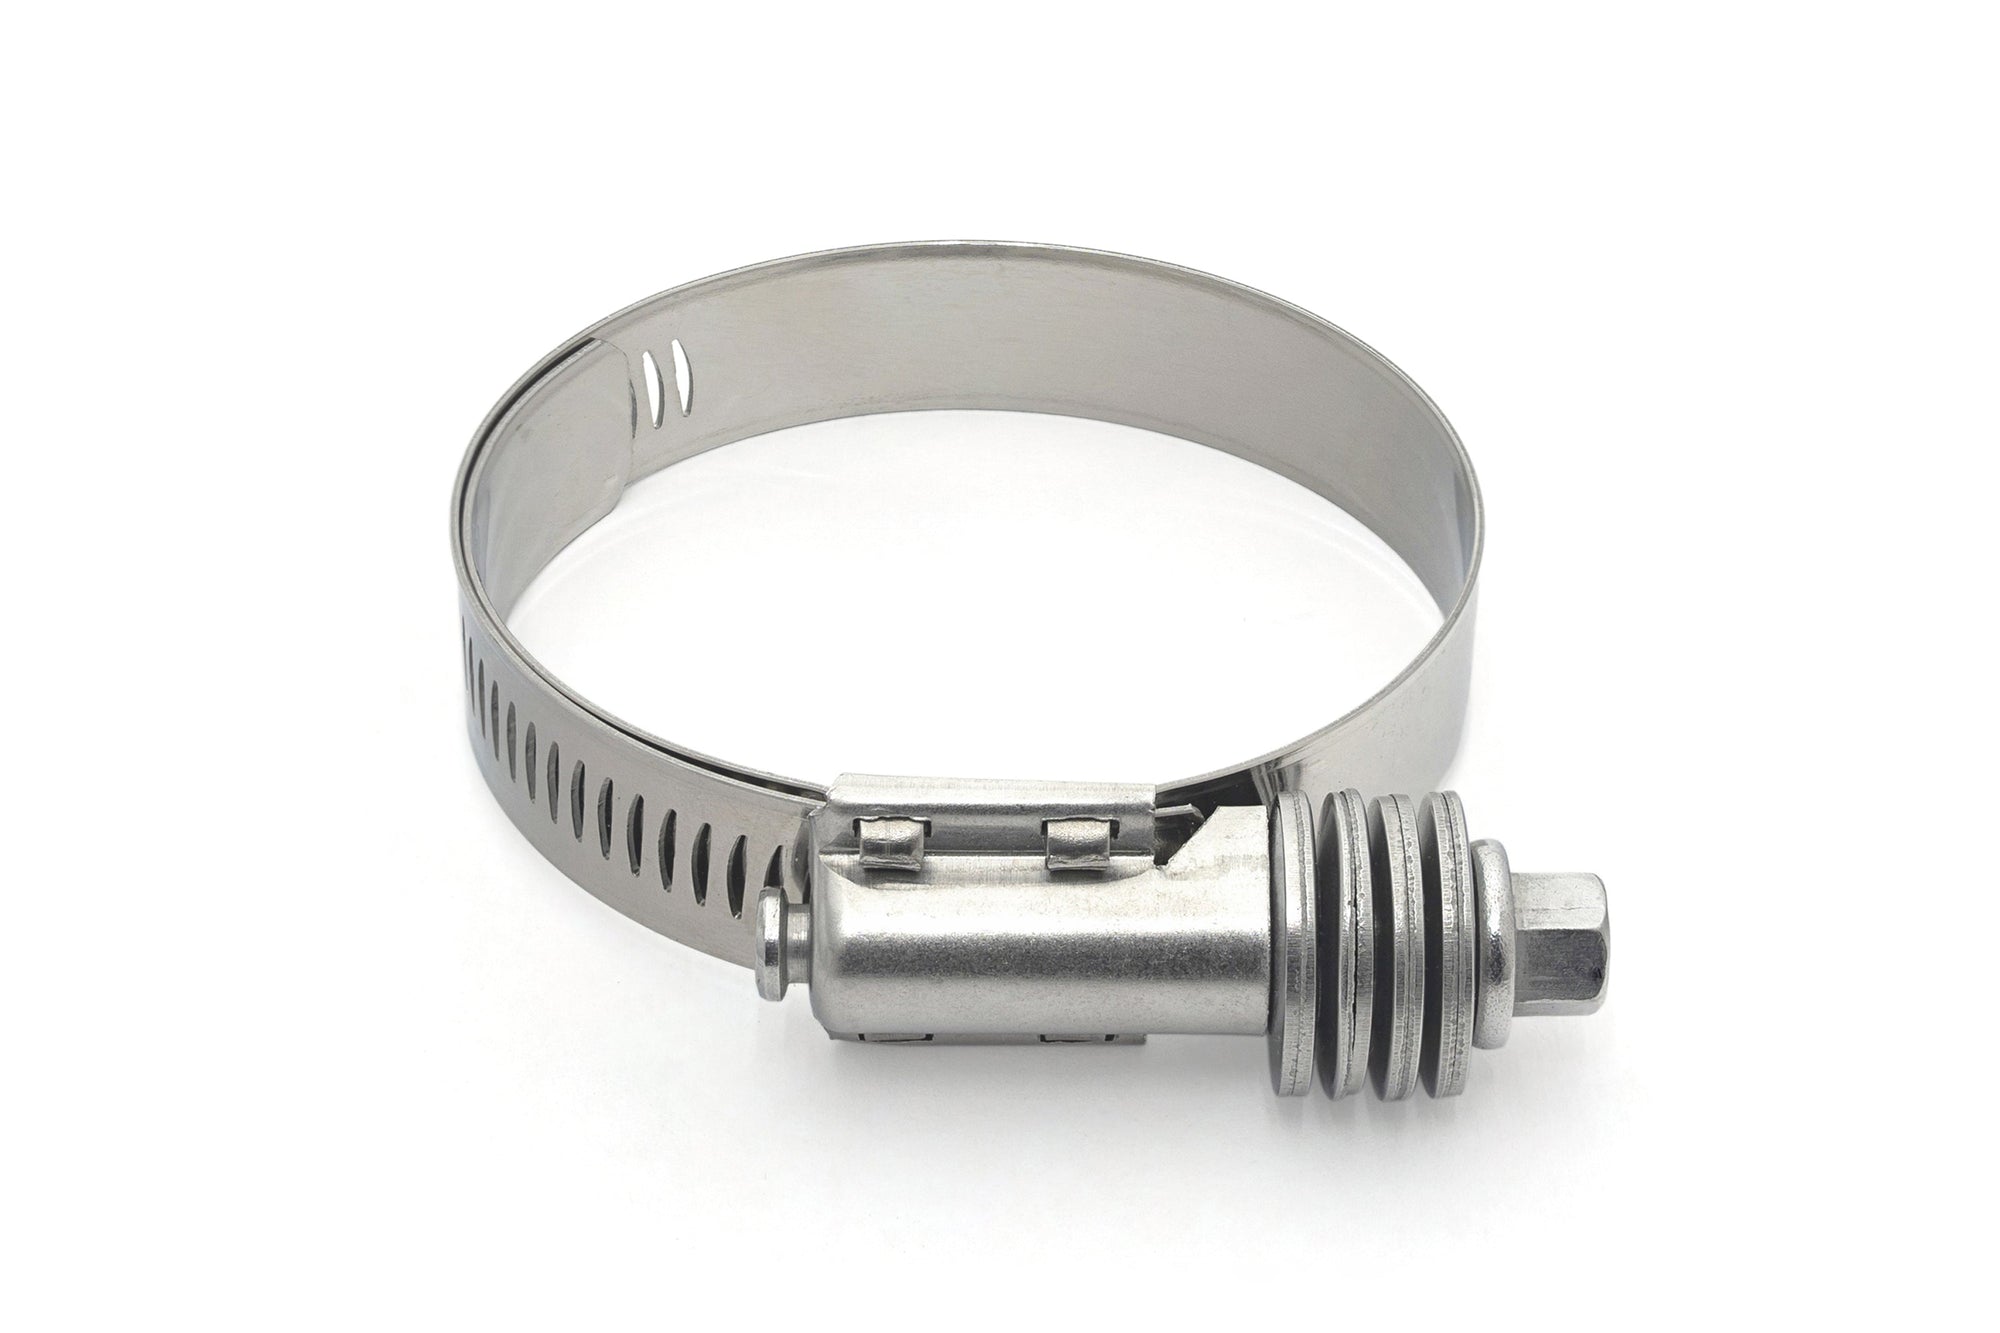 HPS Stainless Steel Constant Tension Hose Clamp 1-13/16 2-3/4 inch 46mm - 70mm Size # 36